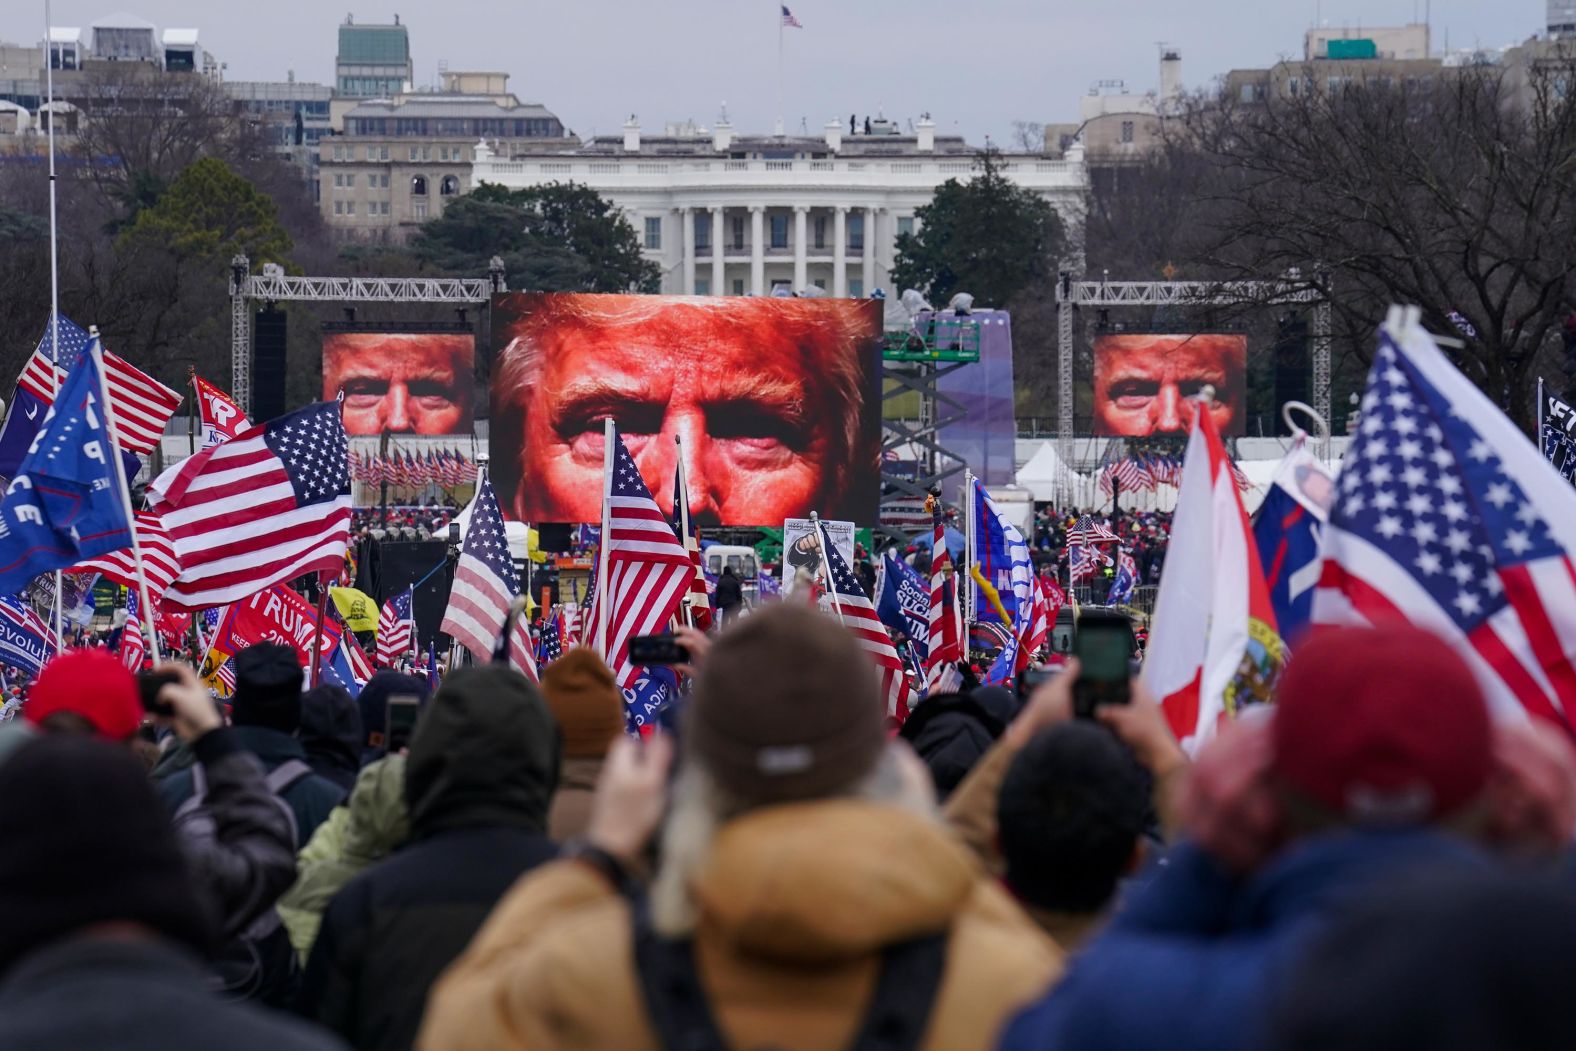 Before the riot, Trump supporters participated in a rally near the White House. Congress was going to be meeting later that day <a href="https://www.cnn.com/interactive/2020/politics/us-presidential-election-race-like-no-other/insurrection_second_impeachment.html" target="_blank">to certify the Electoral College's votes for president and vice president,</a> and multiple Senate Republicans were planning to raise objections to the count as Trump continued to push false conspiracy theories that the election was rigged against him. At the rally, Trump encouraged his supporters to march on the Capitol to challenge the final certification of Joe Biden's electoral victory. "If you don't fight like hell, you're not going to have a country anymore," he said during his speech.